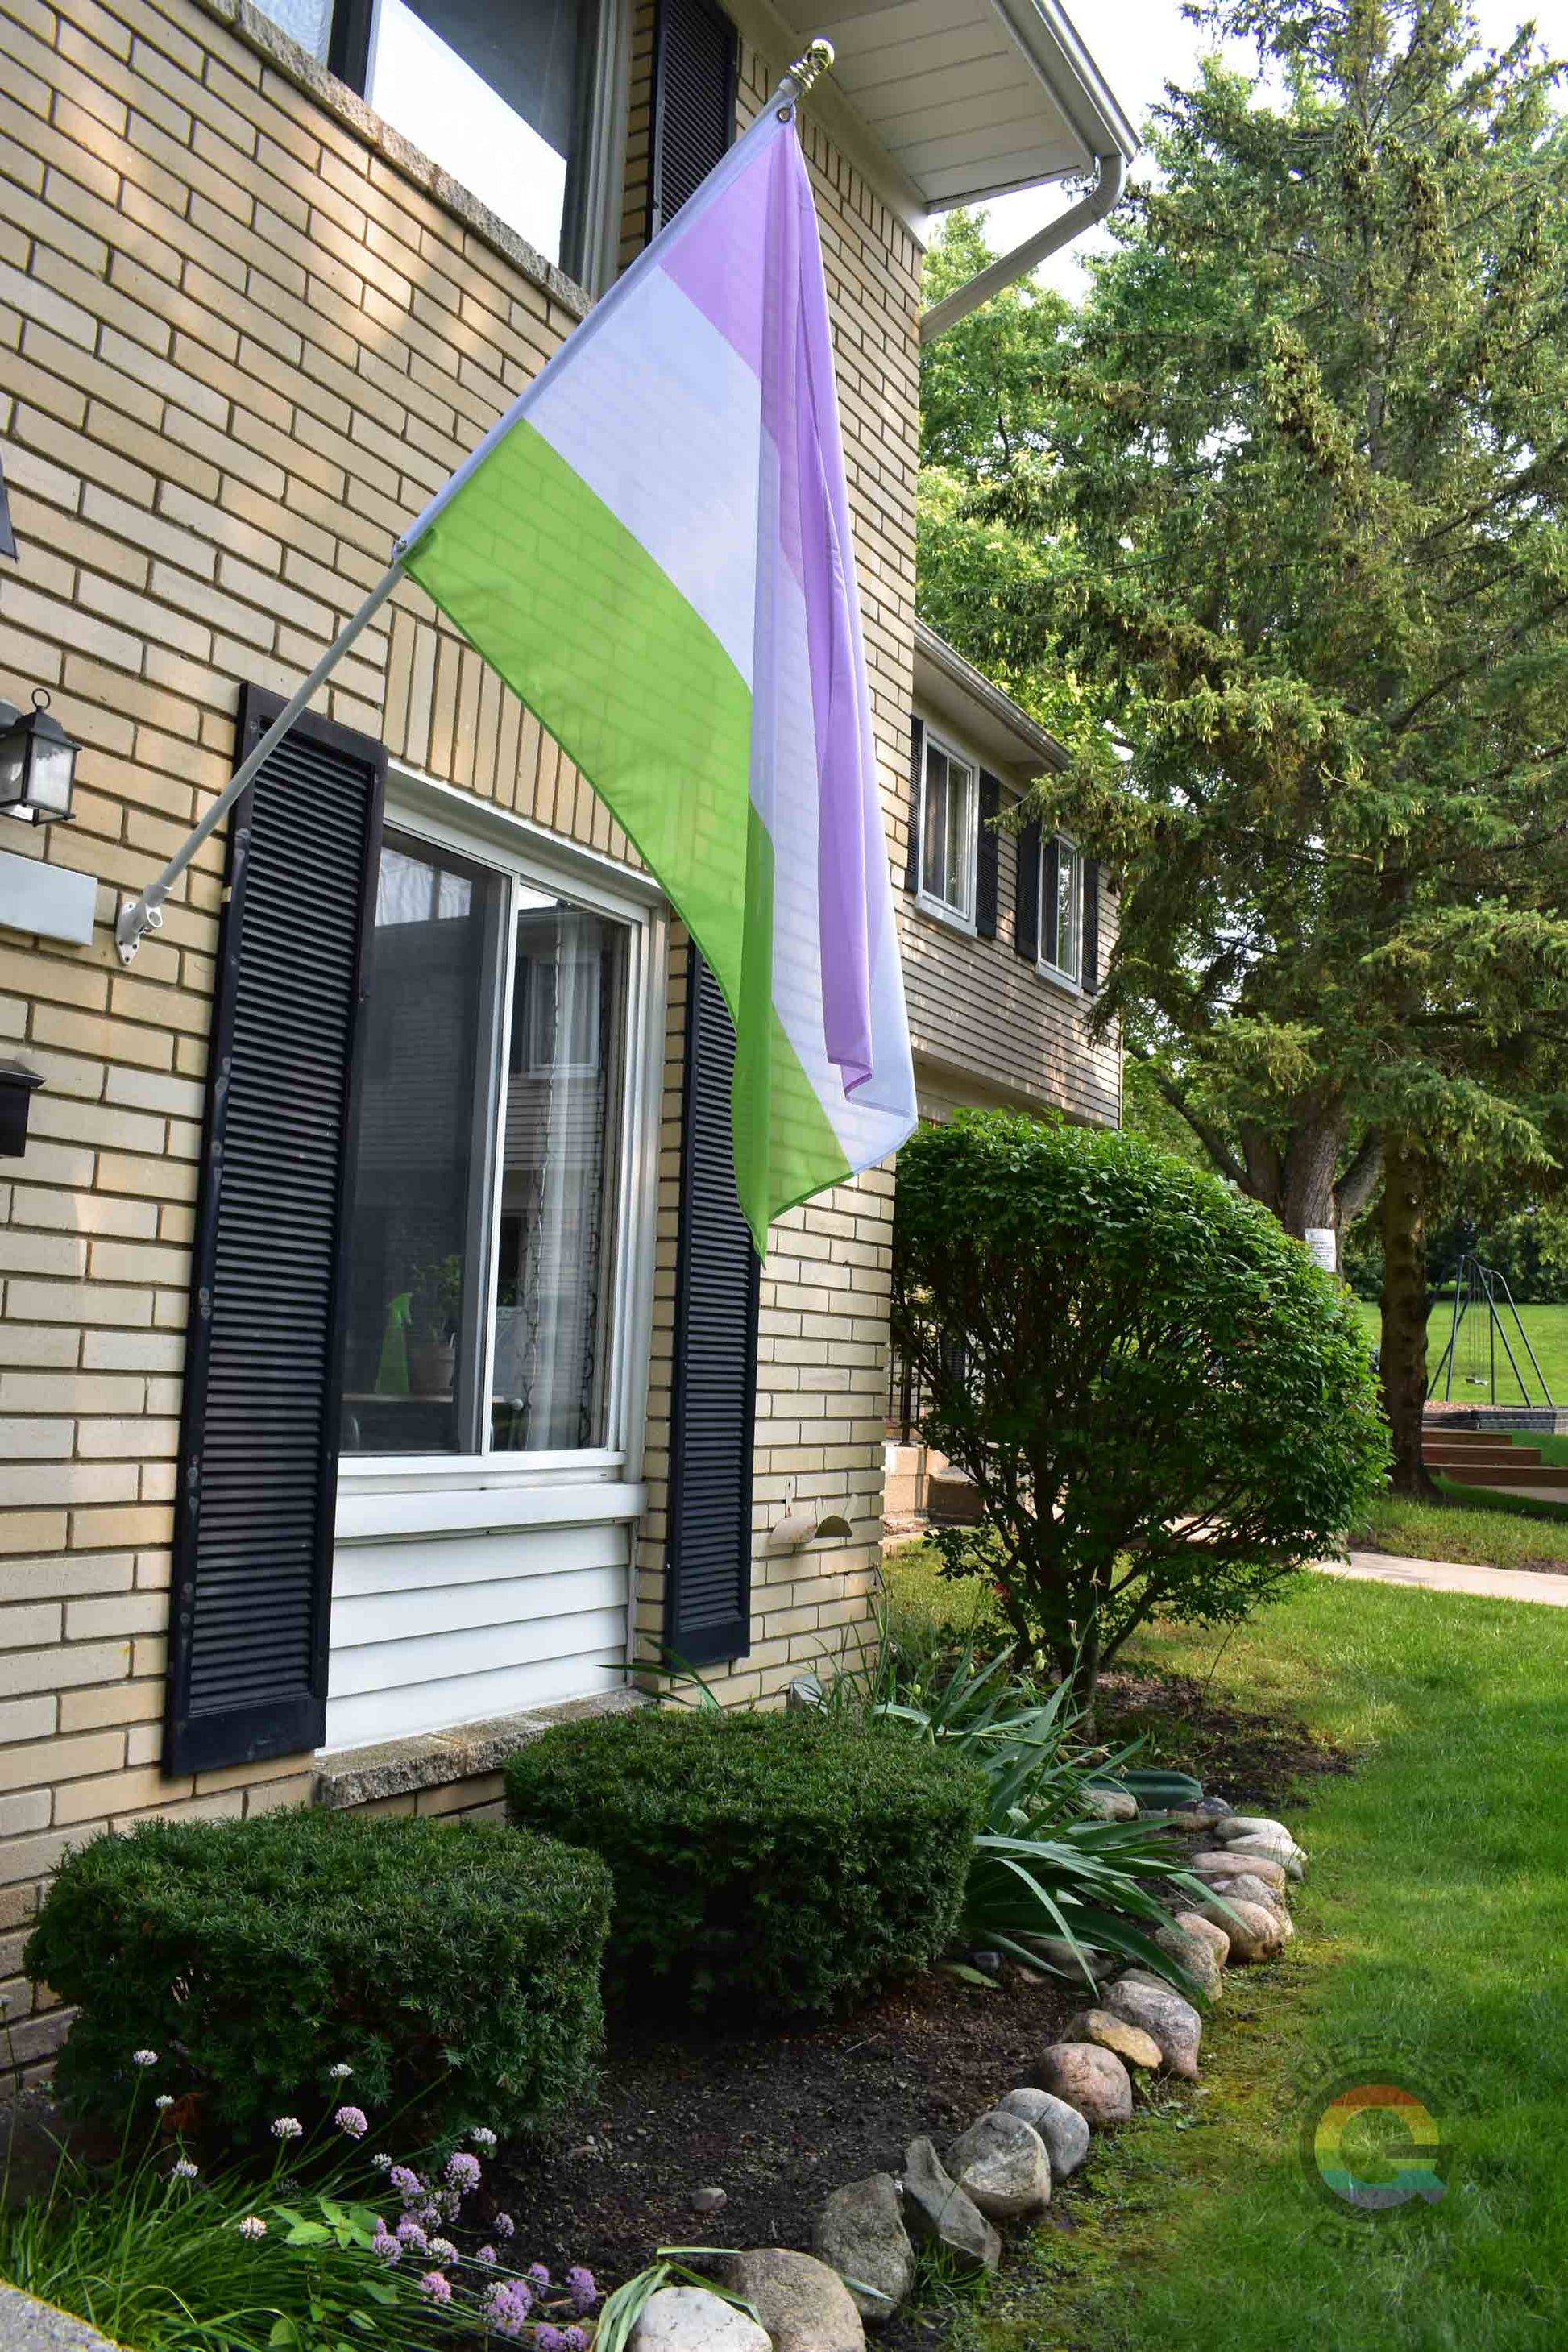 3’x5’ genderqueer pride flag hanging from a flagpole on the outside of a light brick house with dark shutters